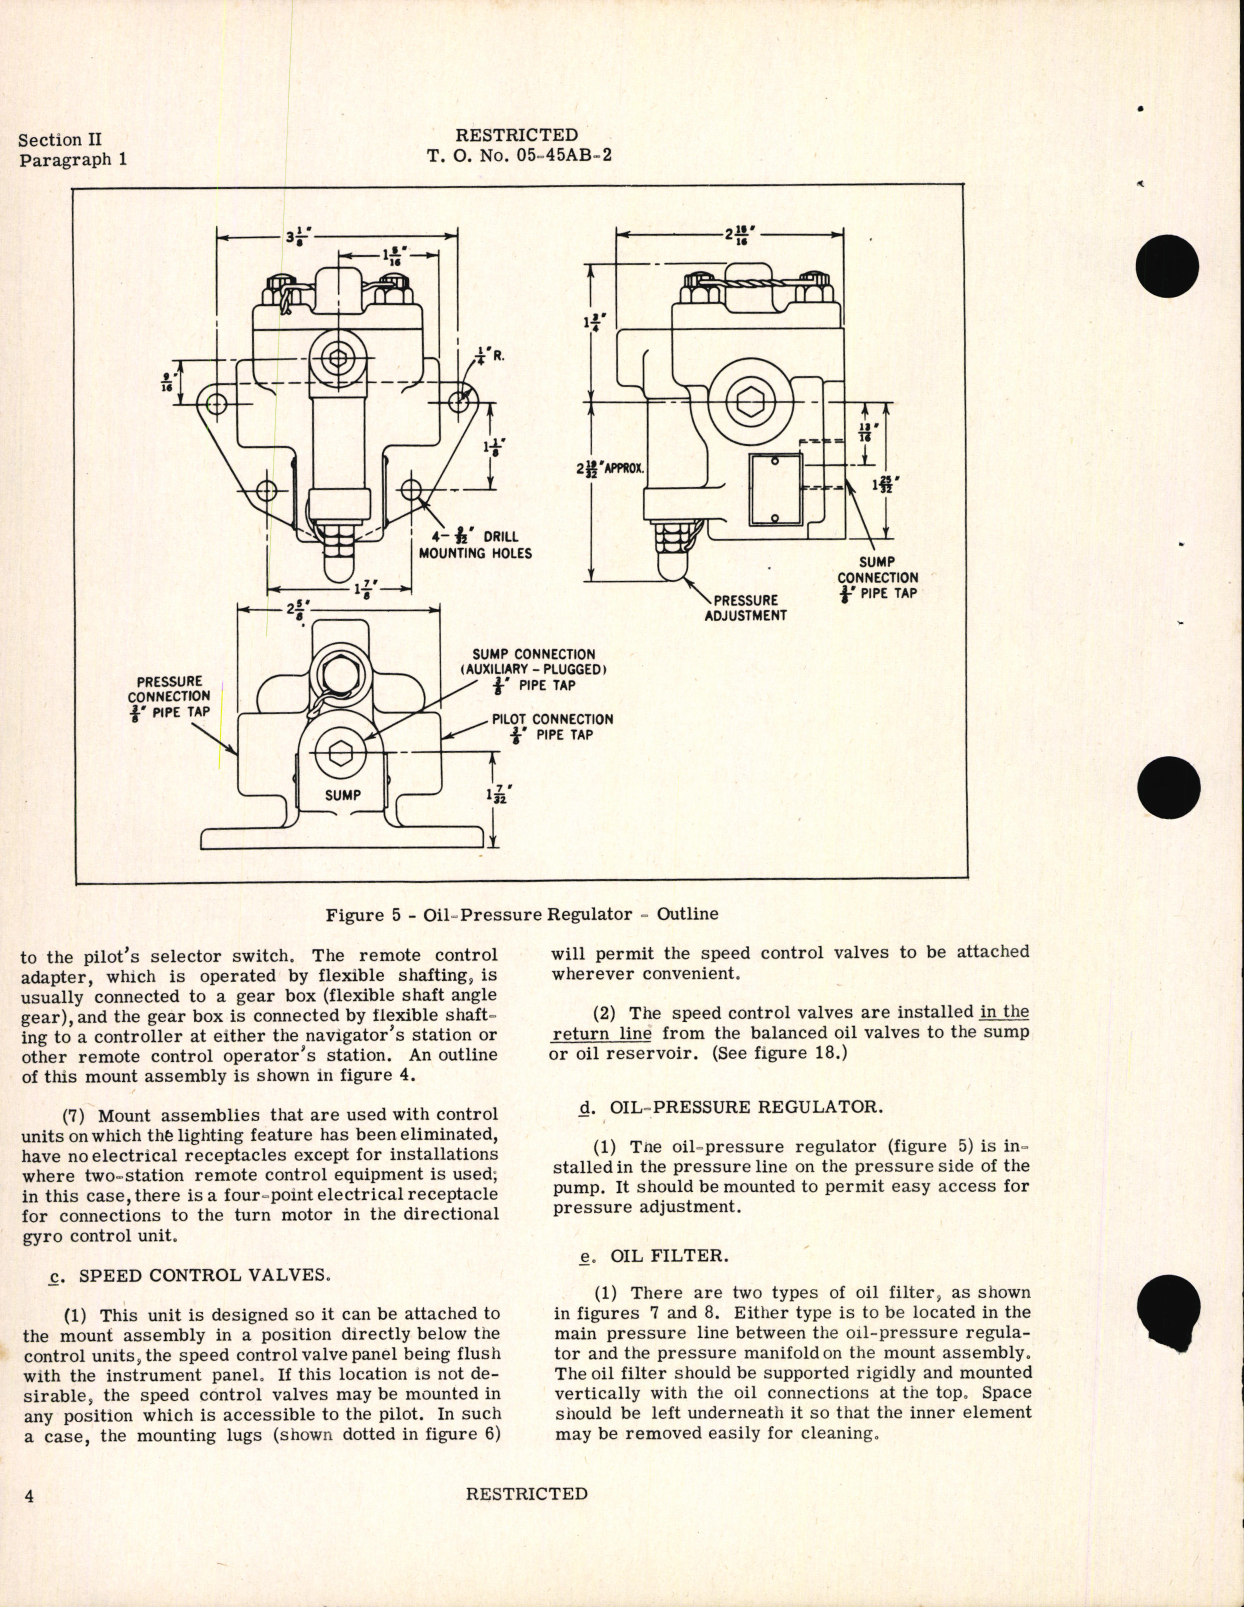 Sample page 12 from AirCorps Library document: Service Instructions for Automatic Pilot Type A-3